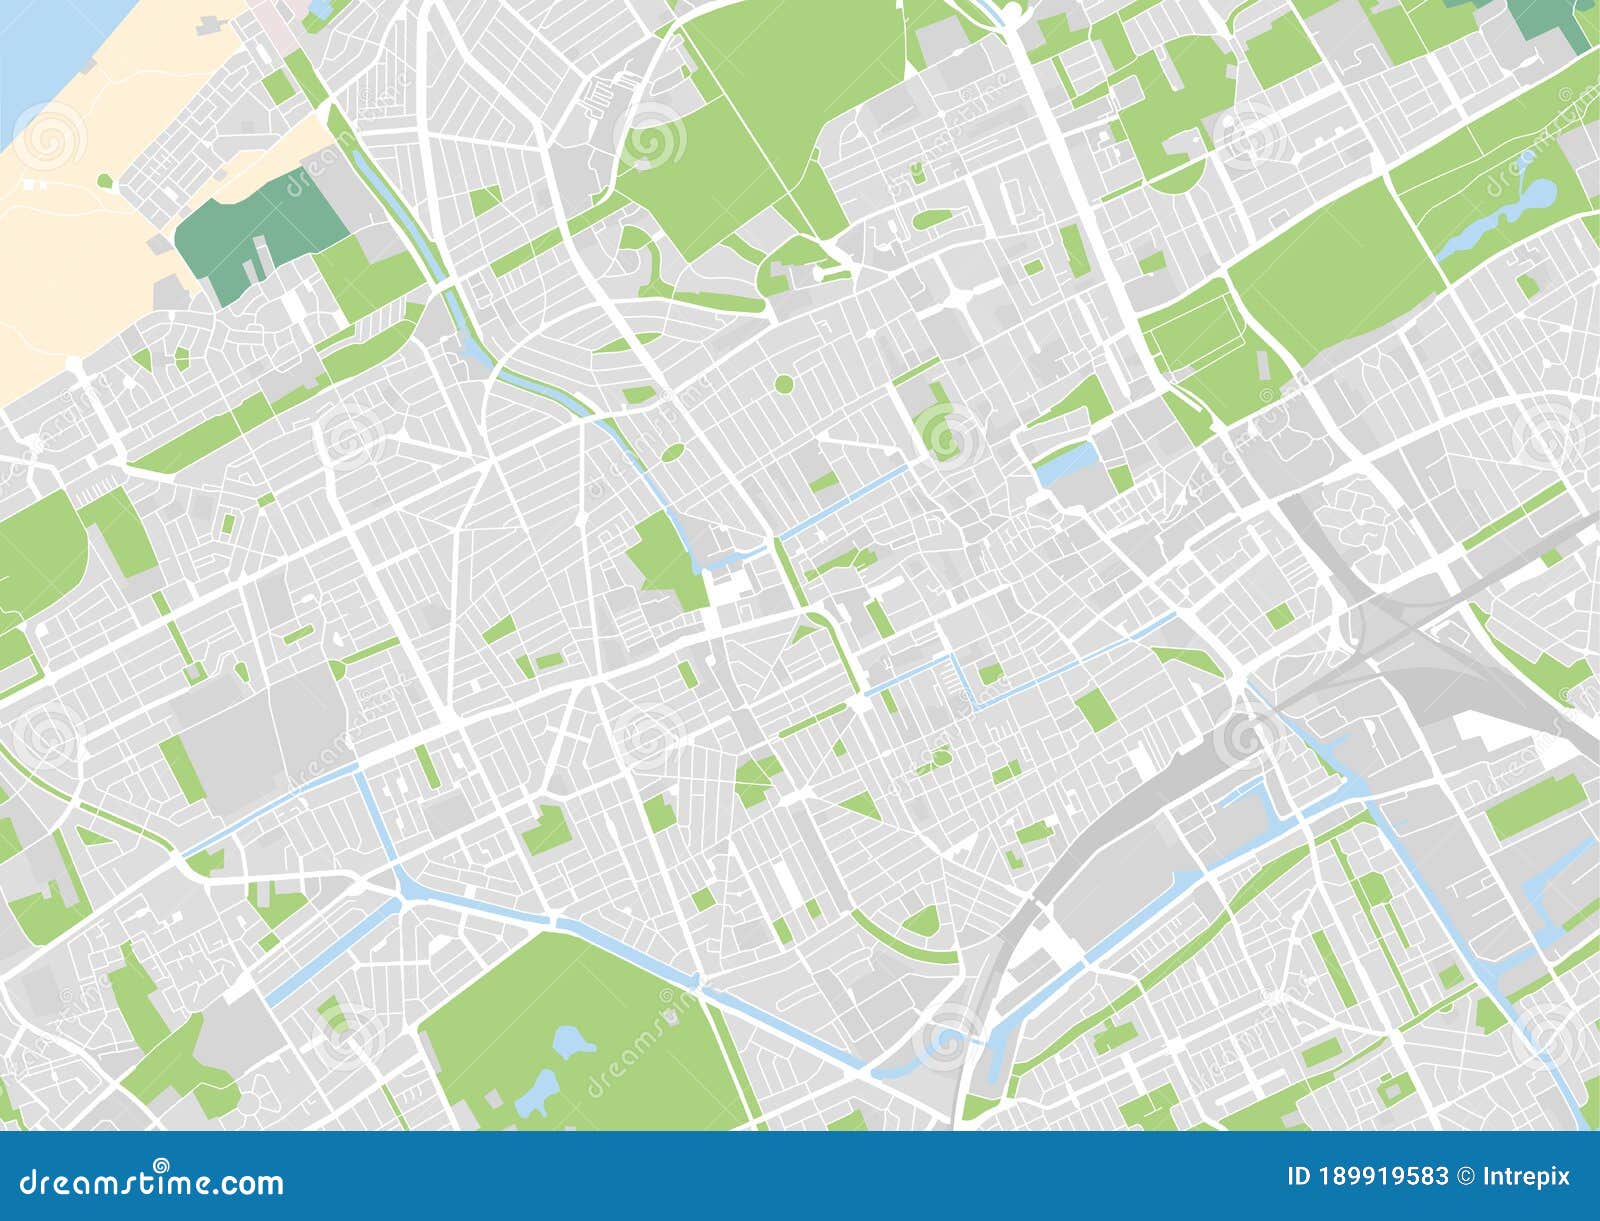 Vector City Map Hague Netherlands Showing Landcover Water Trees Parks Transportation Network 189919583 